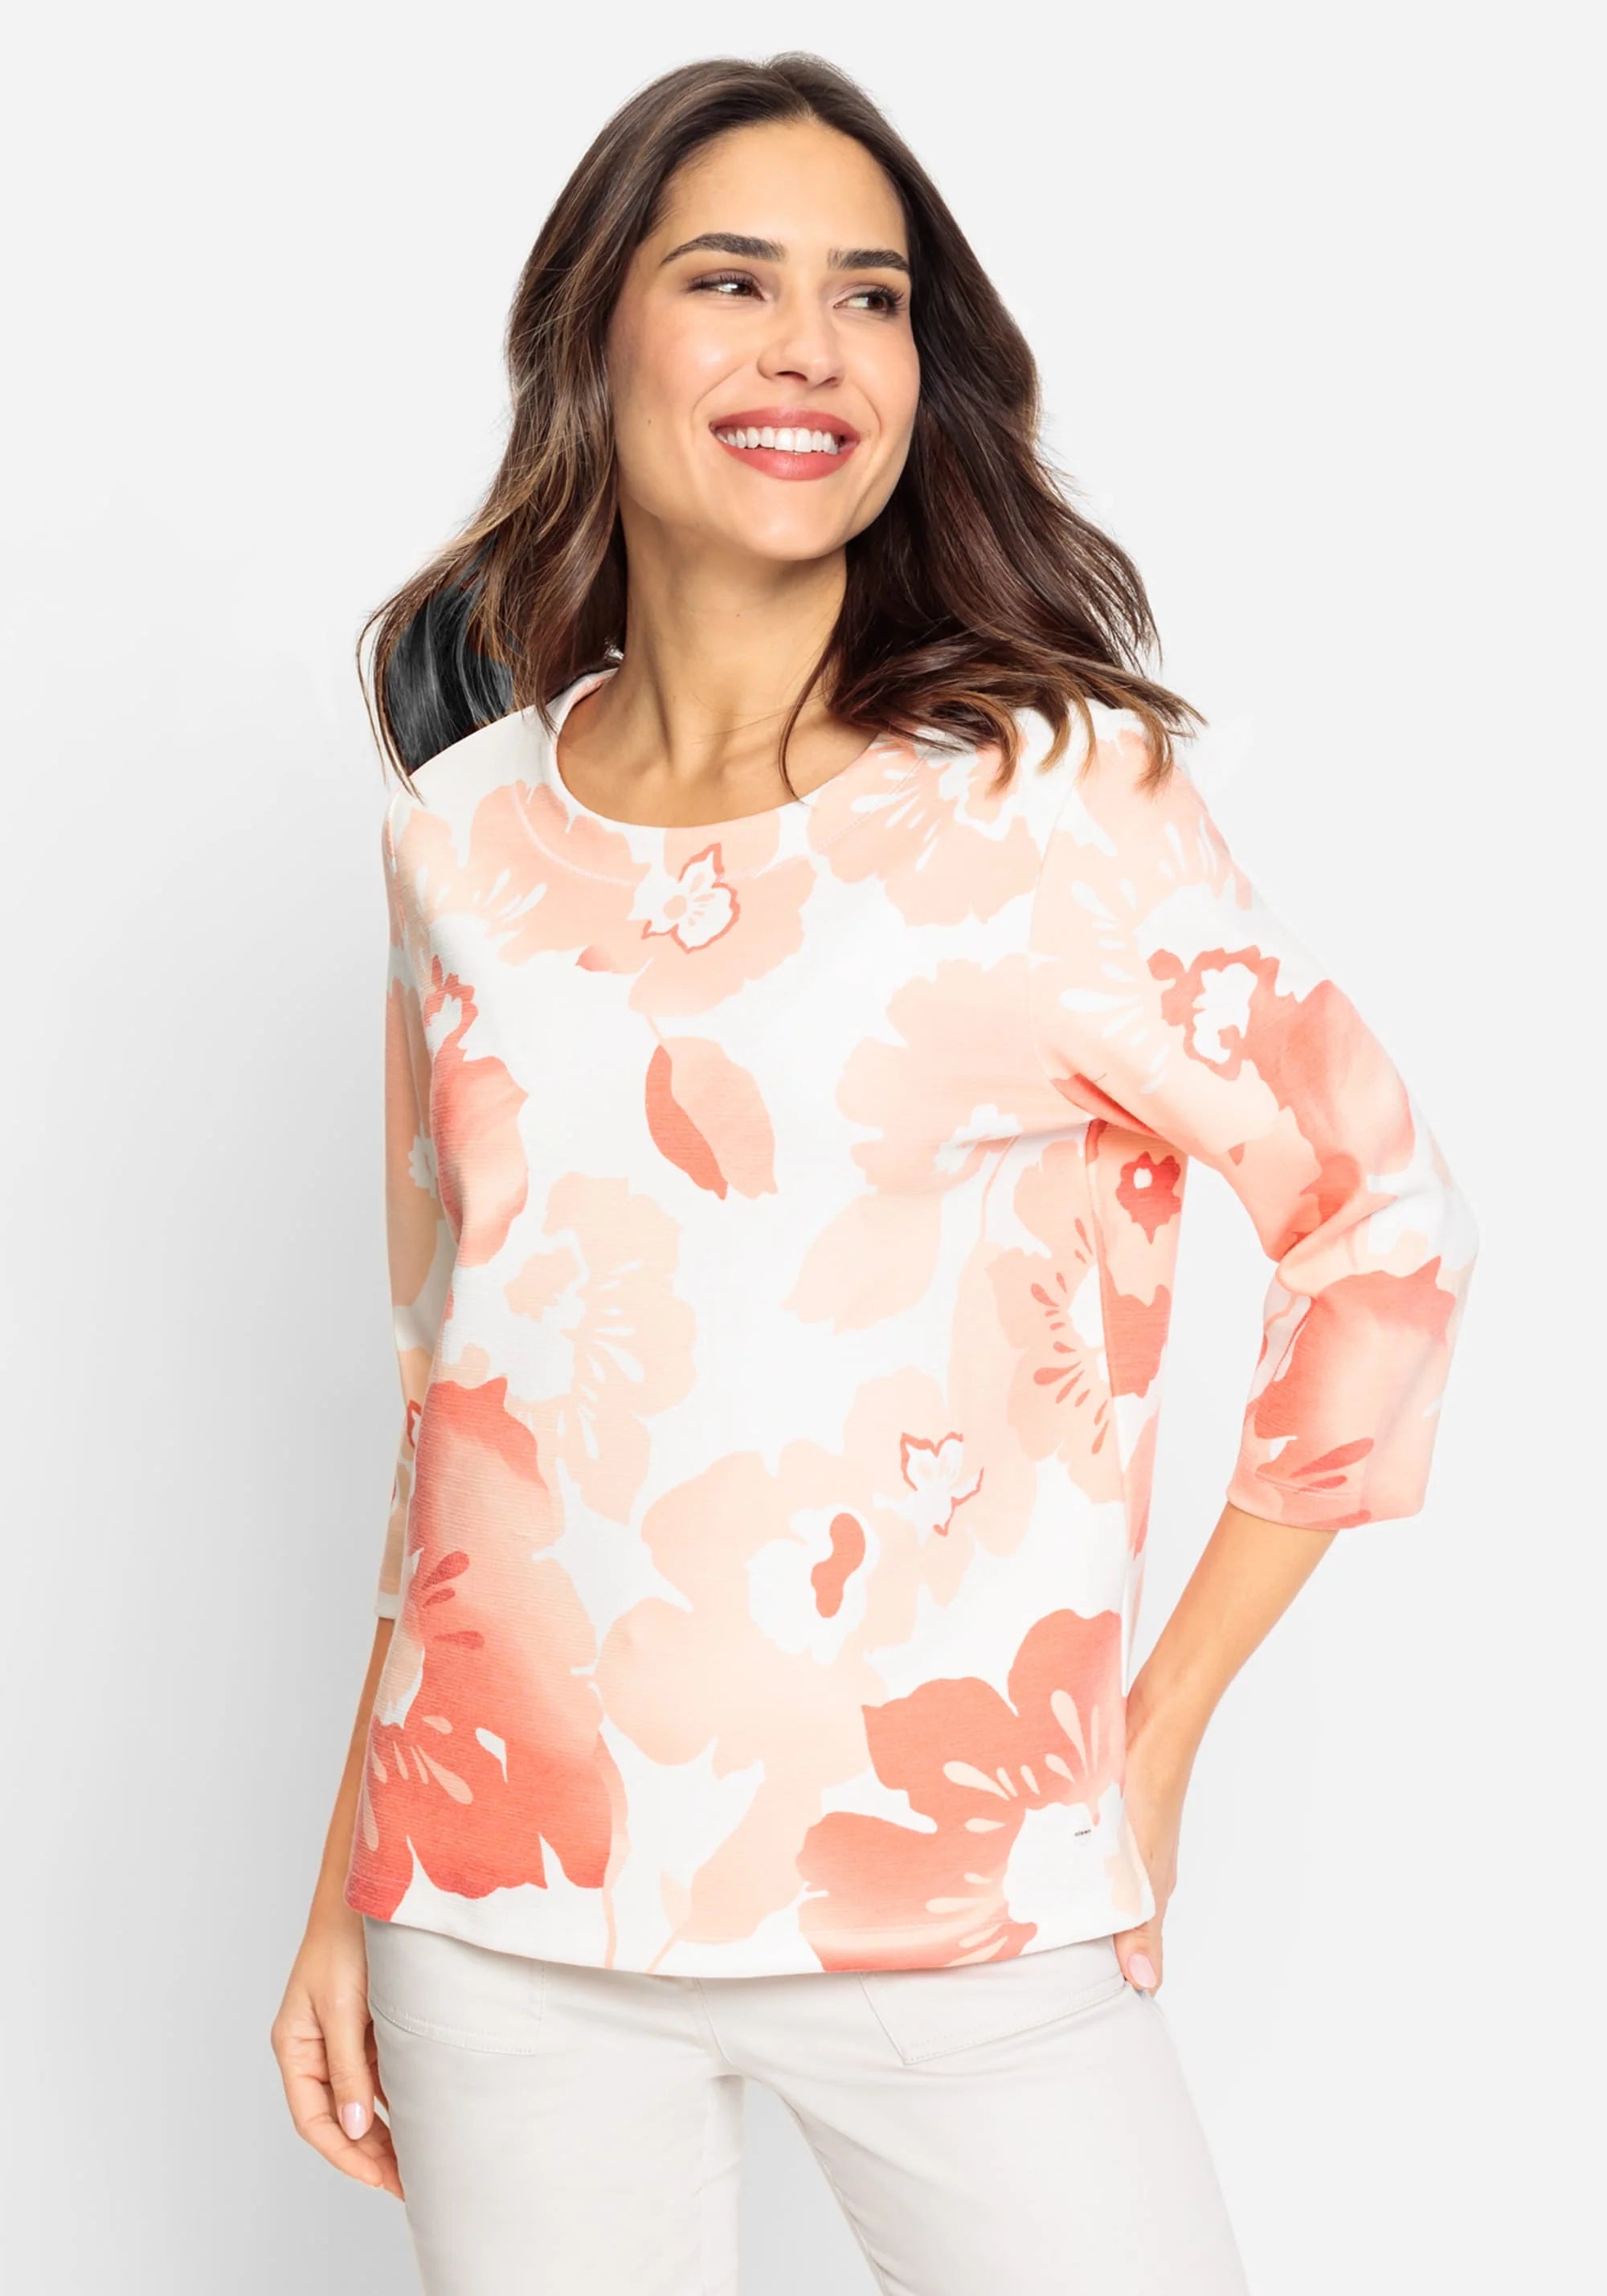 Floral Jersey Knit Top in Apricot Crush